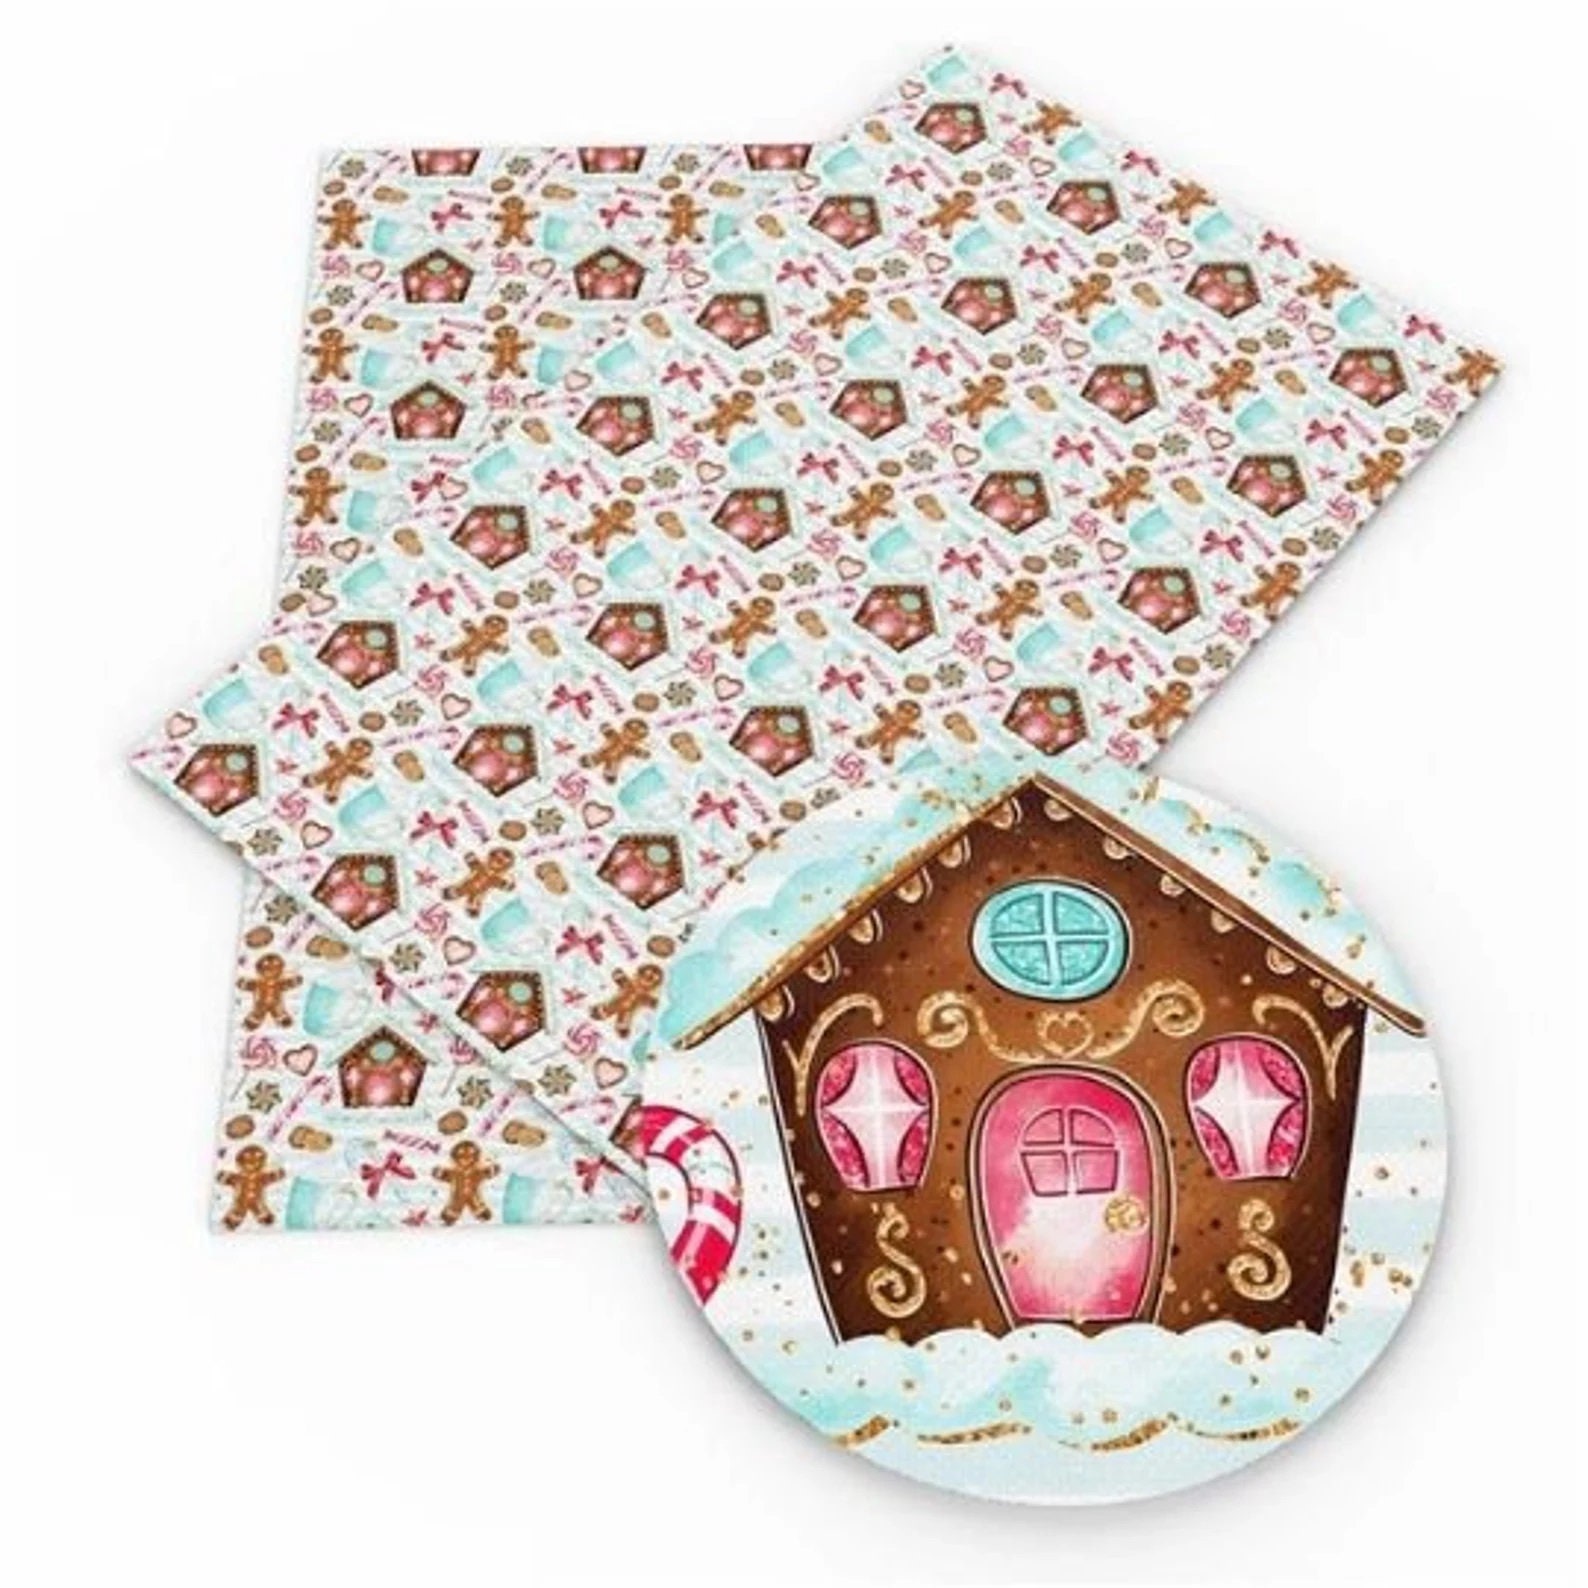 Christmas Gingerbread Pattern Faux Leather Sheet - Dressed Up